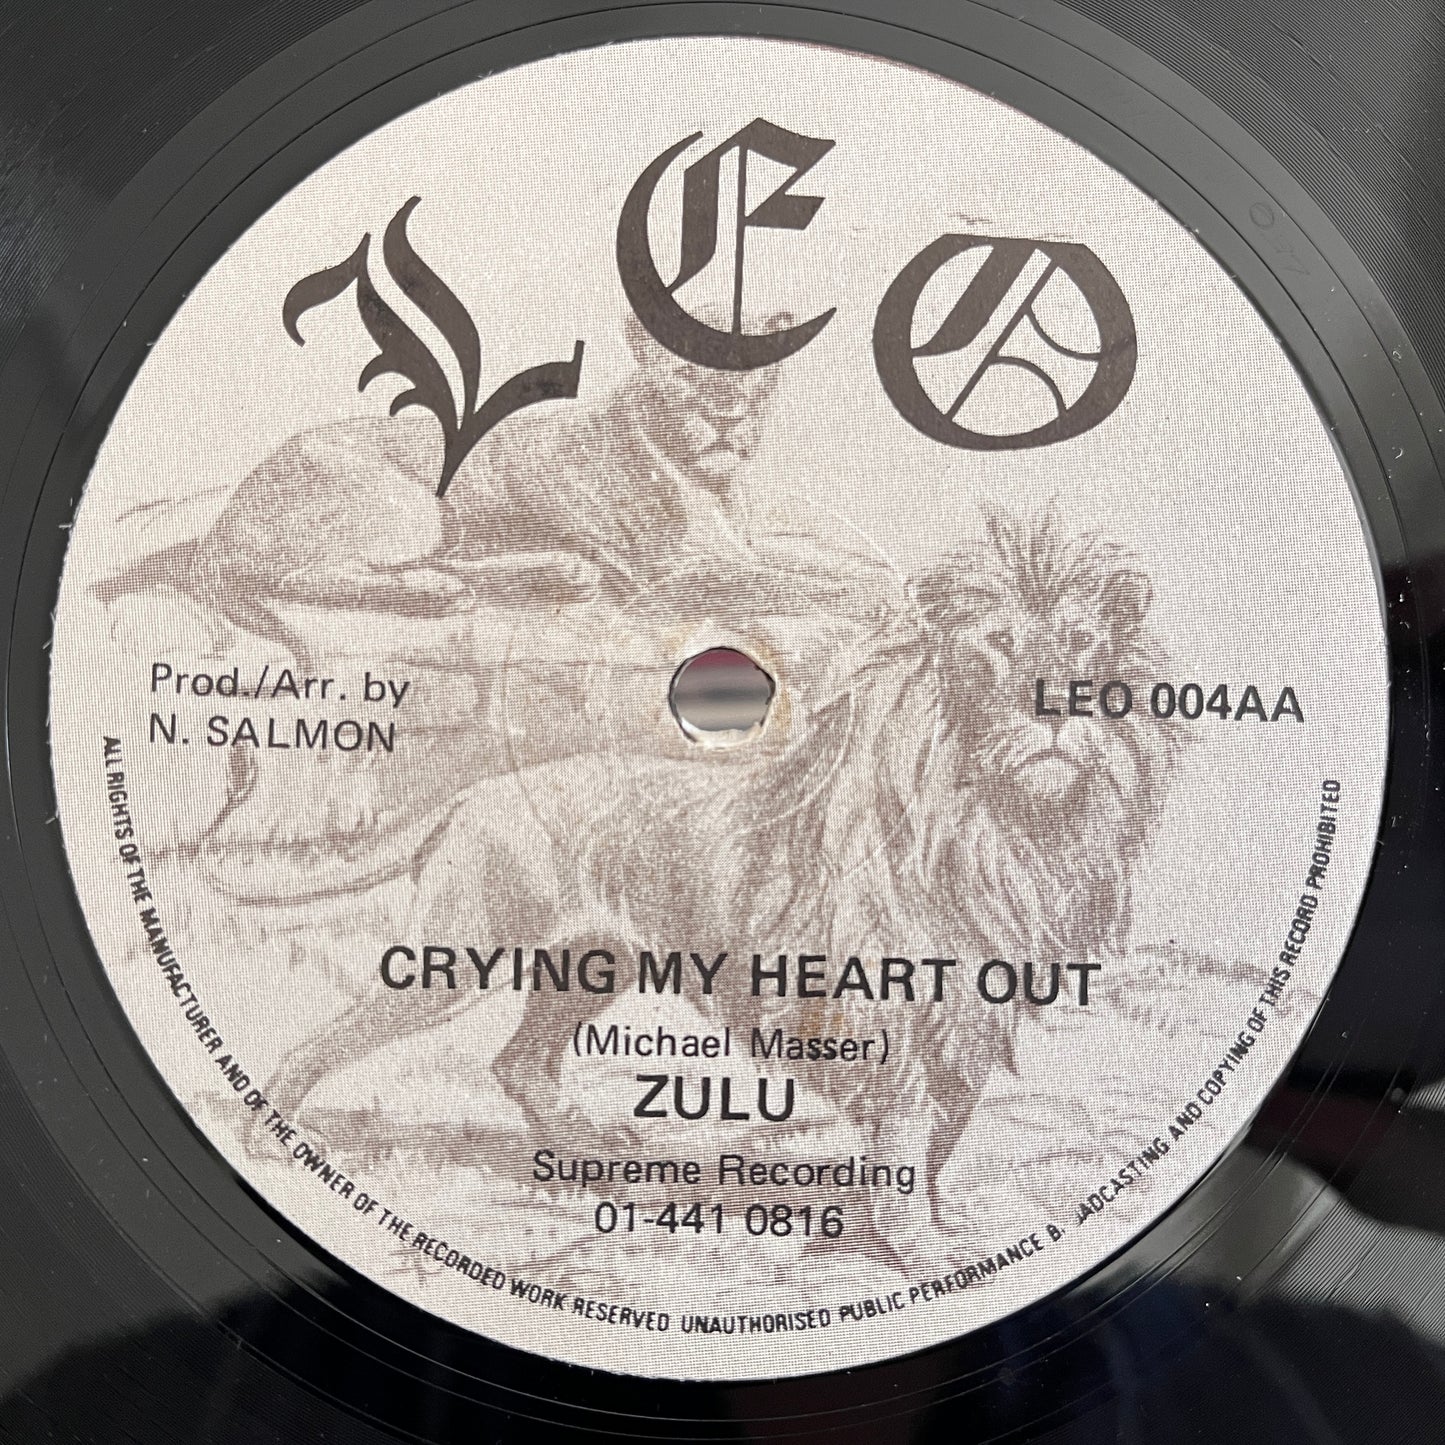 Zulu – What The Use / Crying My Heart Out